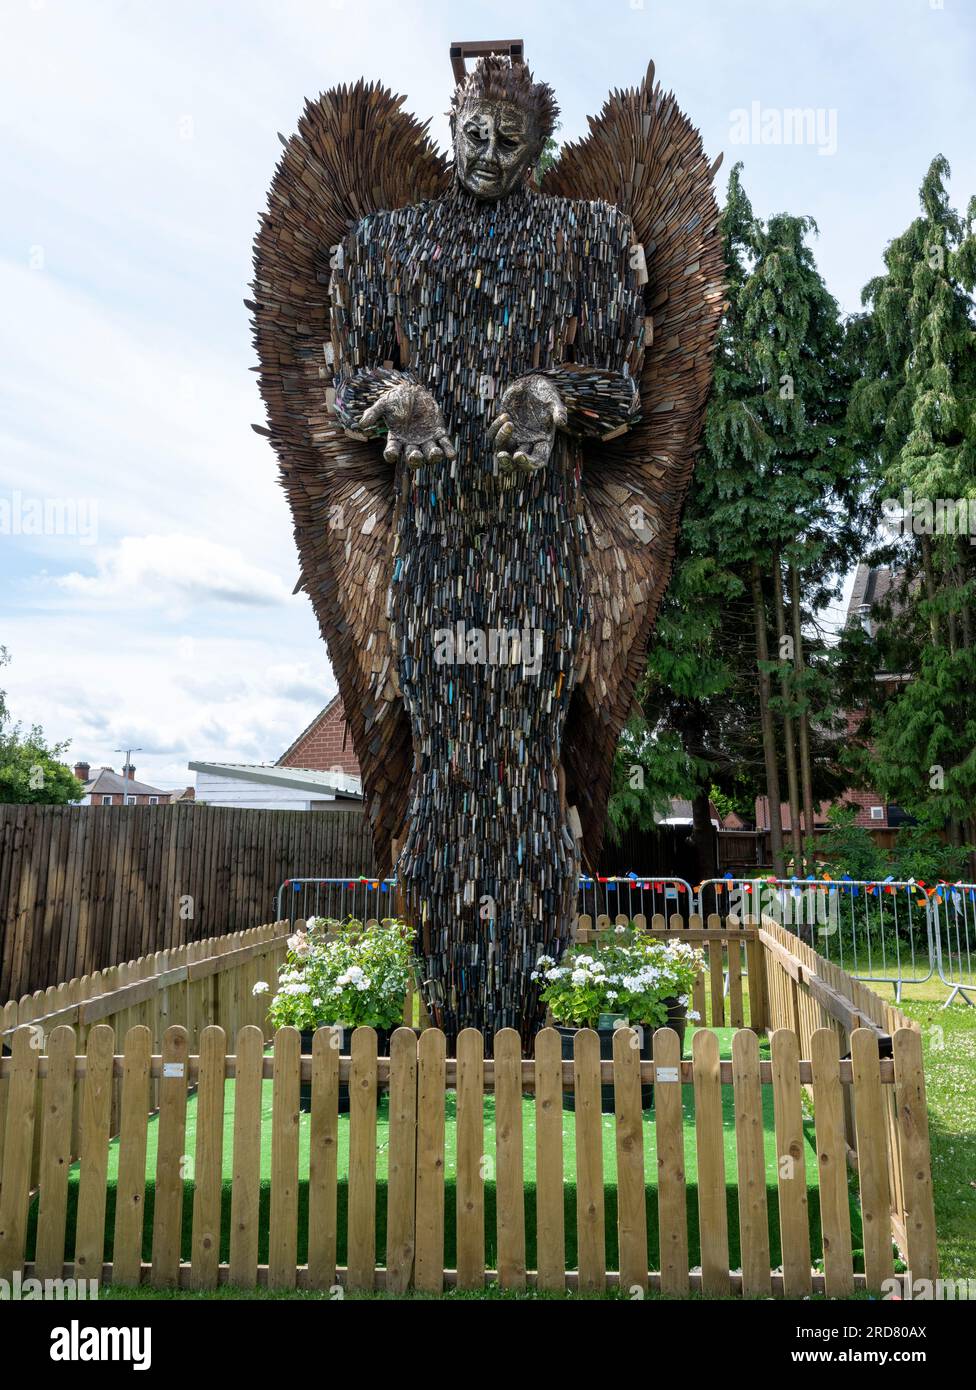 The Knife Angel - sculptor by Alfie Bradley - on display in Lichfield, Staffordshire, England, UK Stock Photo